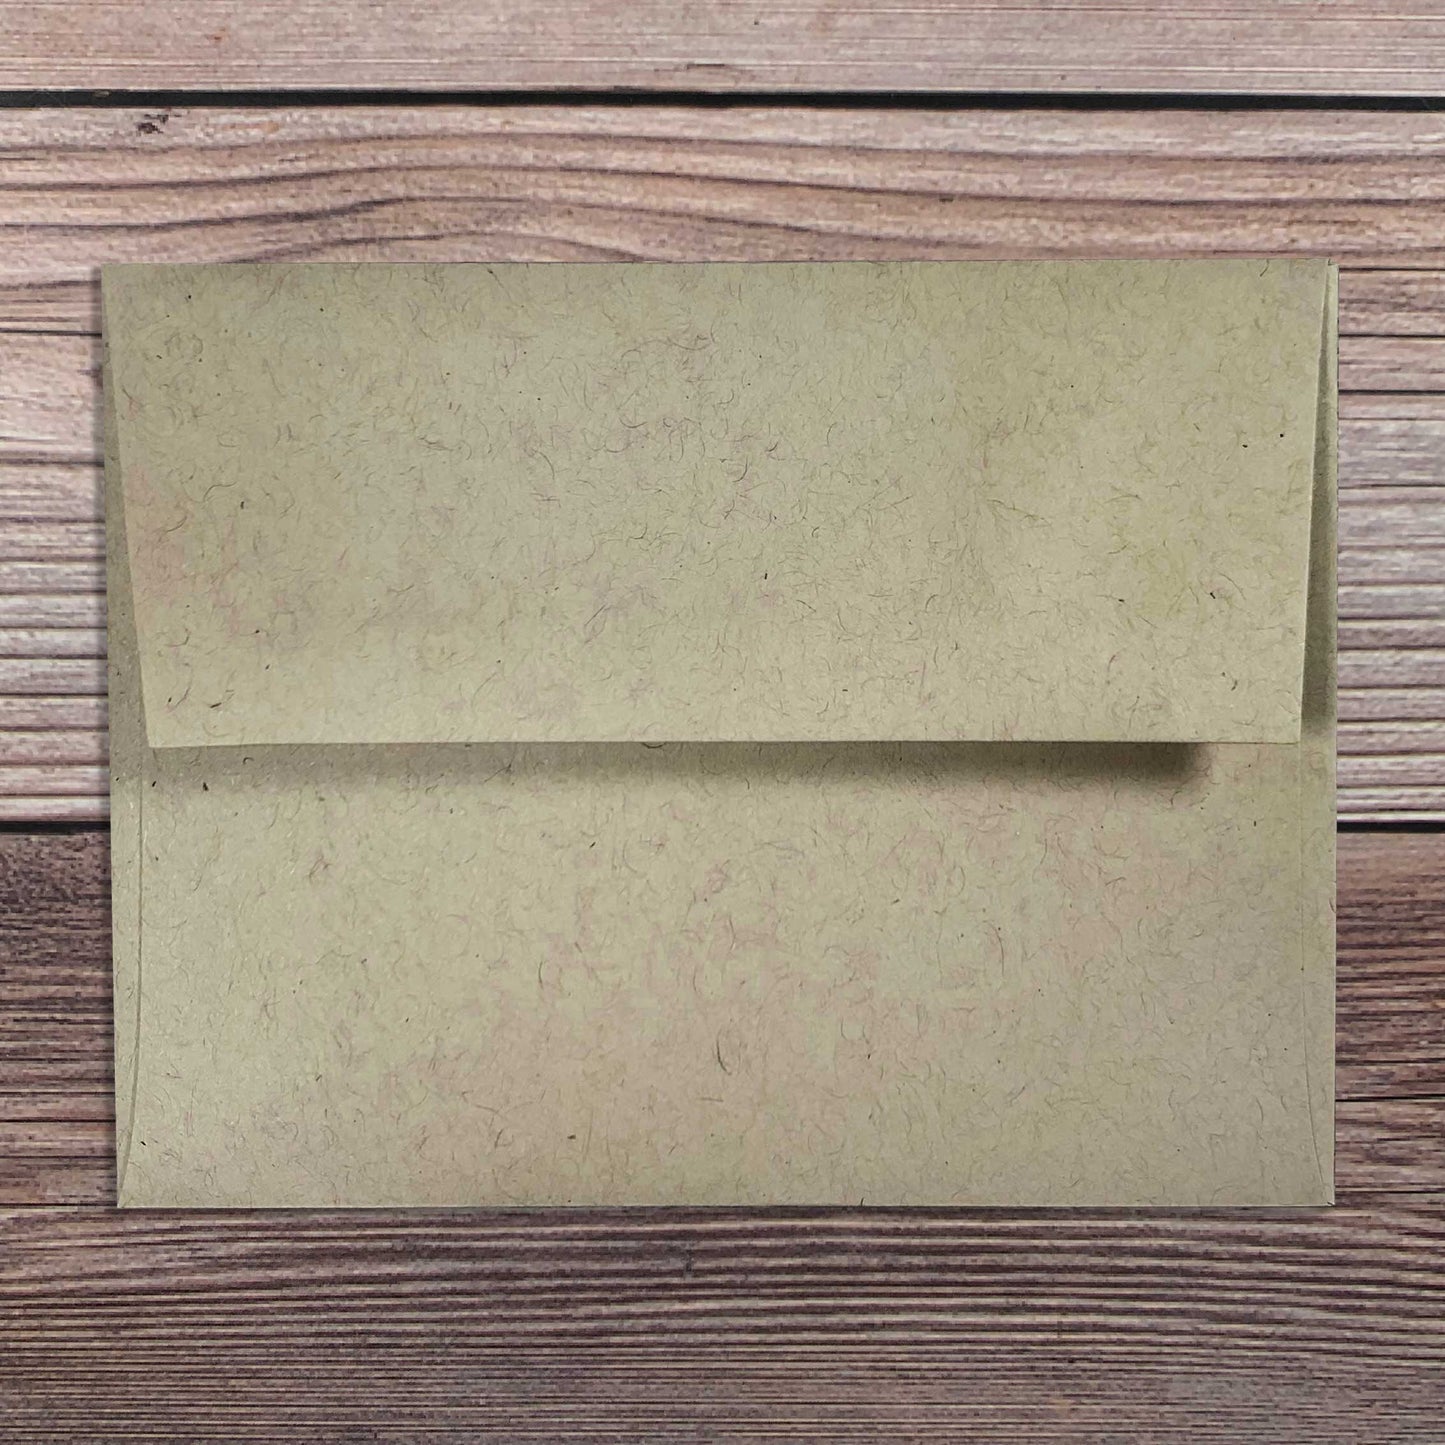 Greeting Card envelope, kraft color, square flap, included with letterpress Thanksgiving greeting card.